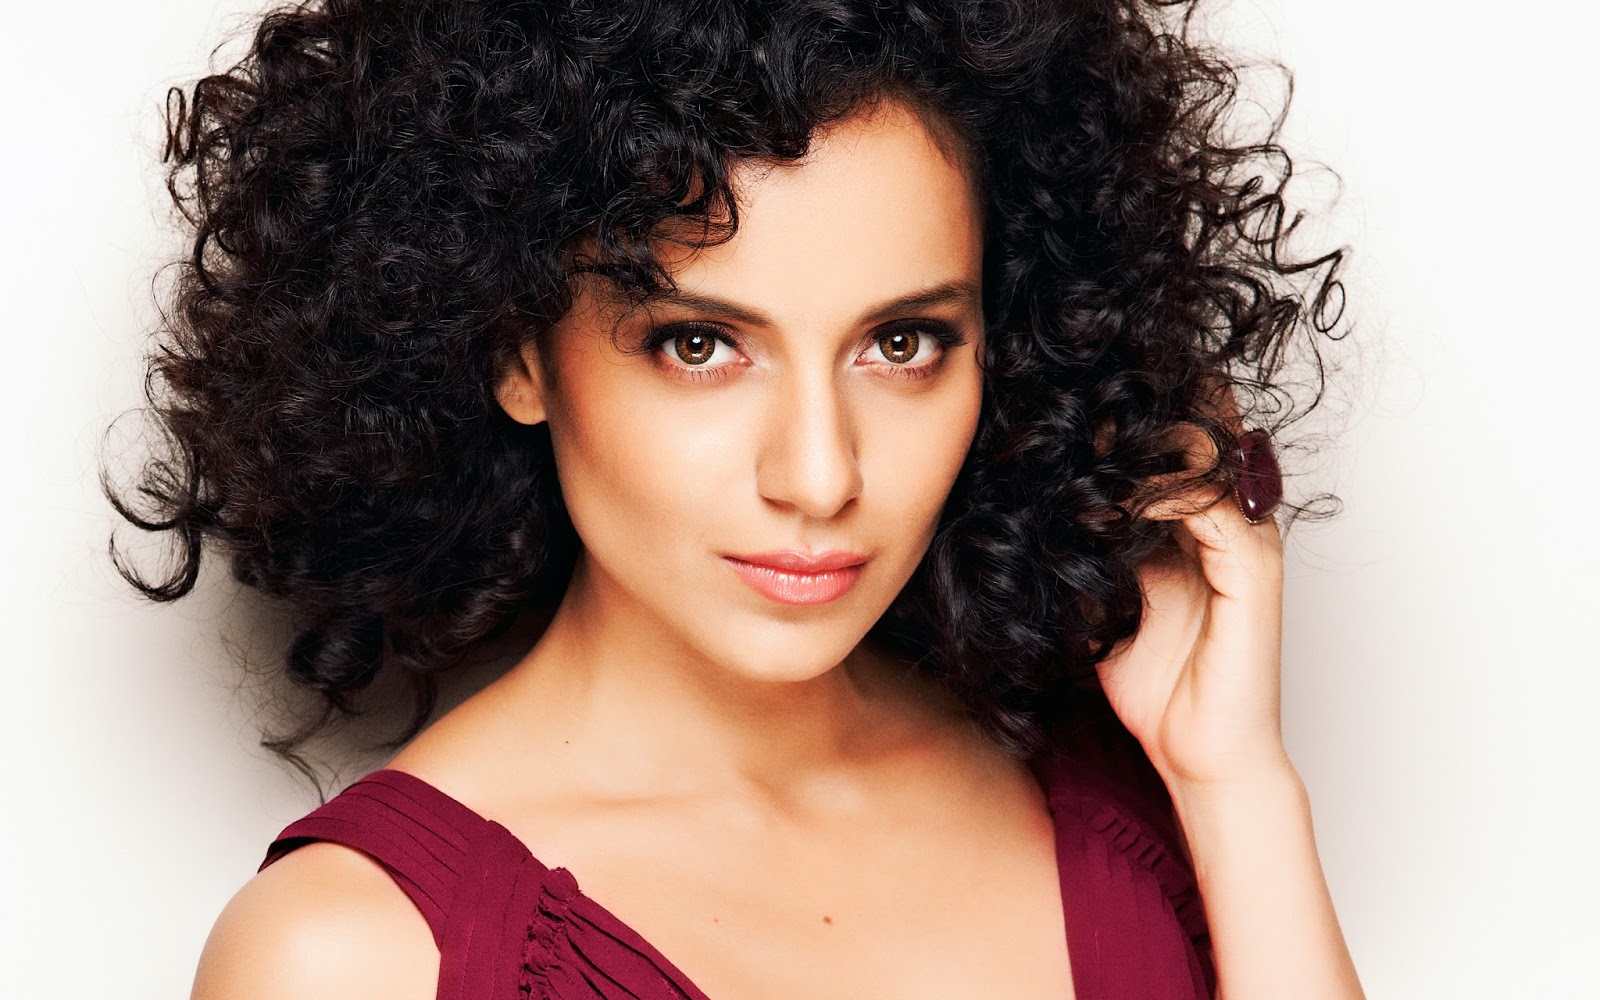 List of Actress Kangana Ranaut new upcoming Hollywood movies in 2016, 2017 Calendar on Upcoming Wiki. Updated list of movies 2016-2017. Info about films released in wiki, imdb, wikipedia.